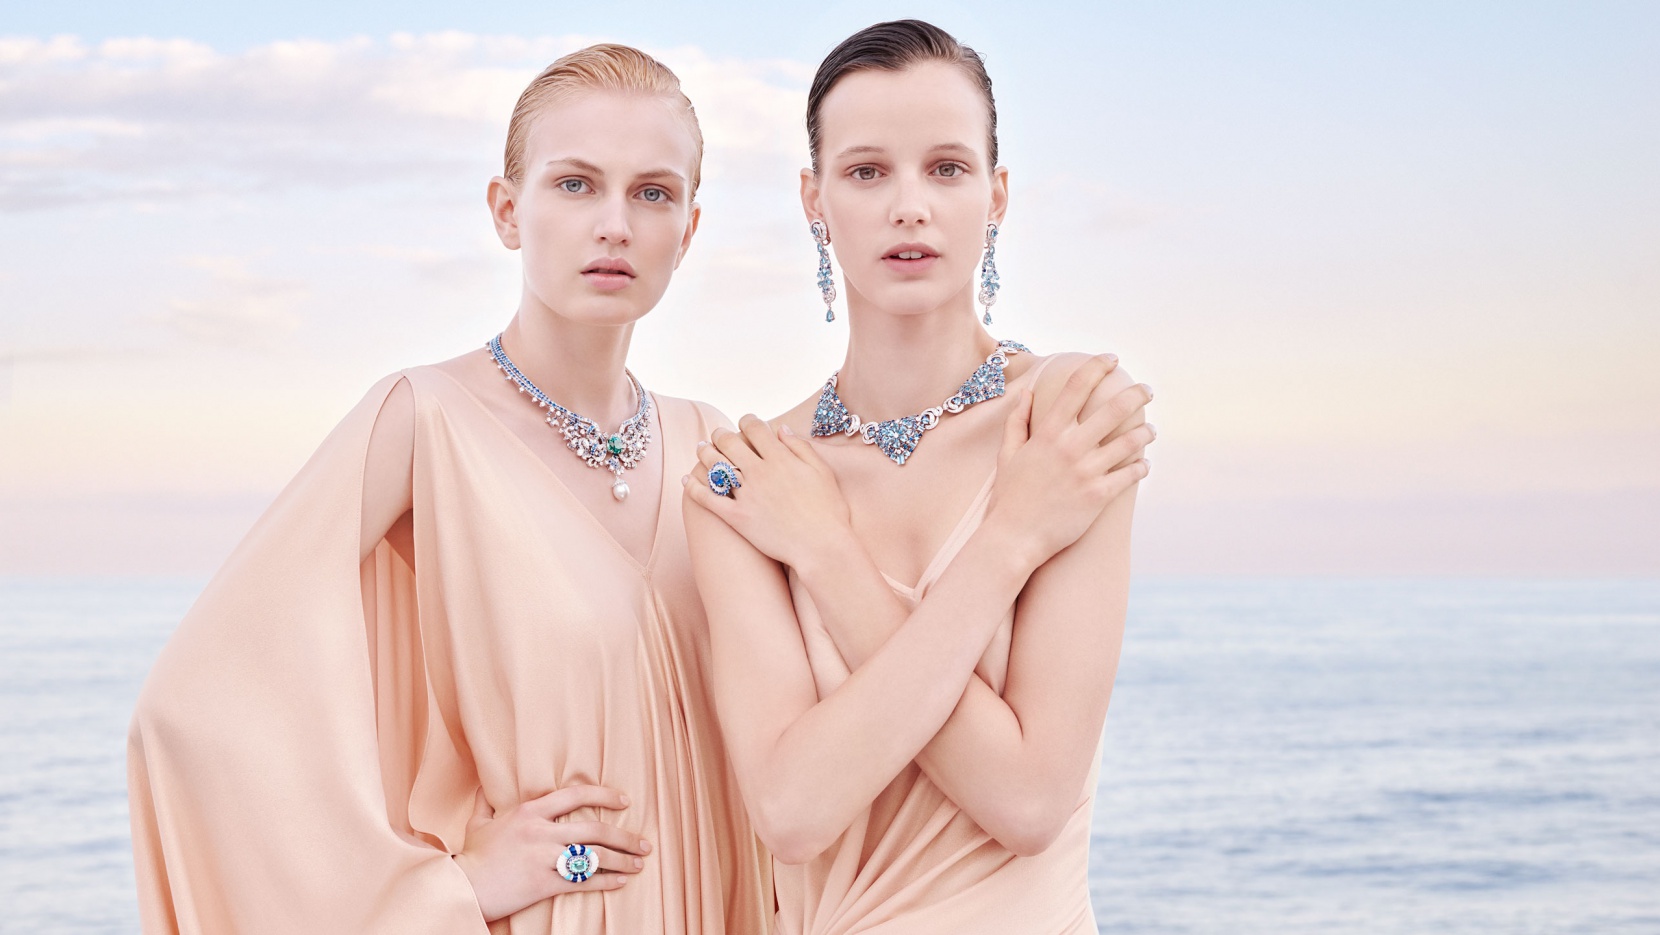 7 Iconic Looks from Van Cleef & Arpels